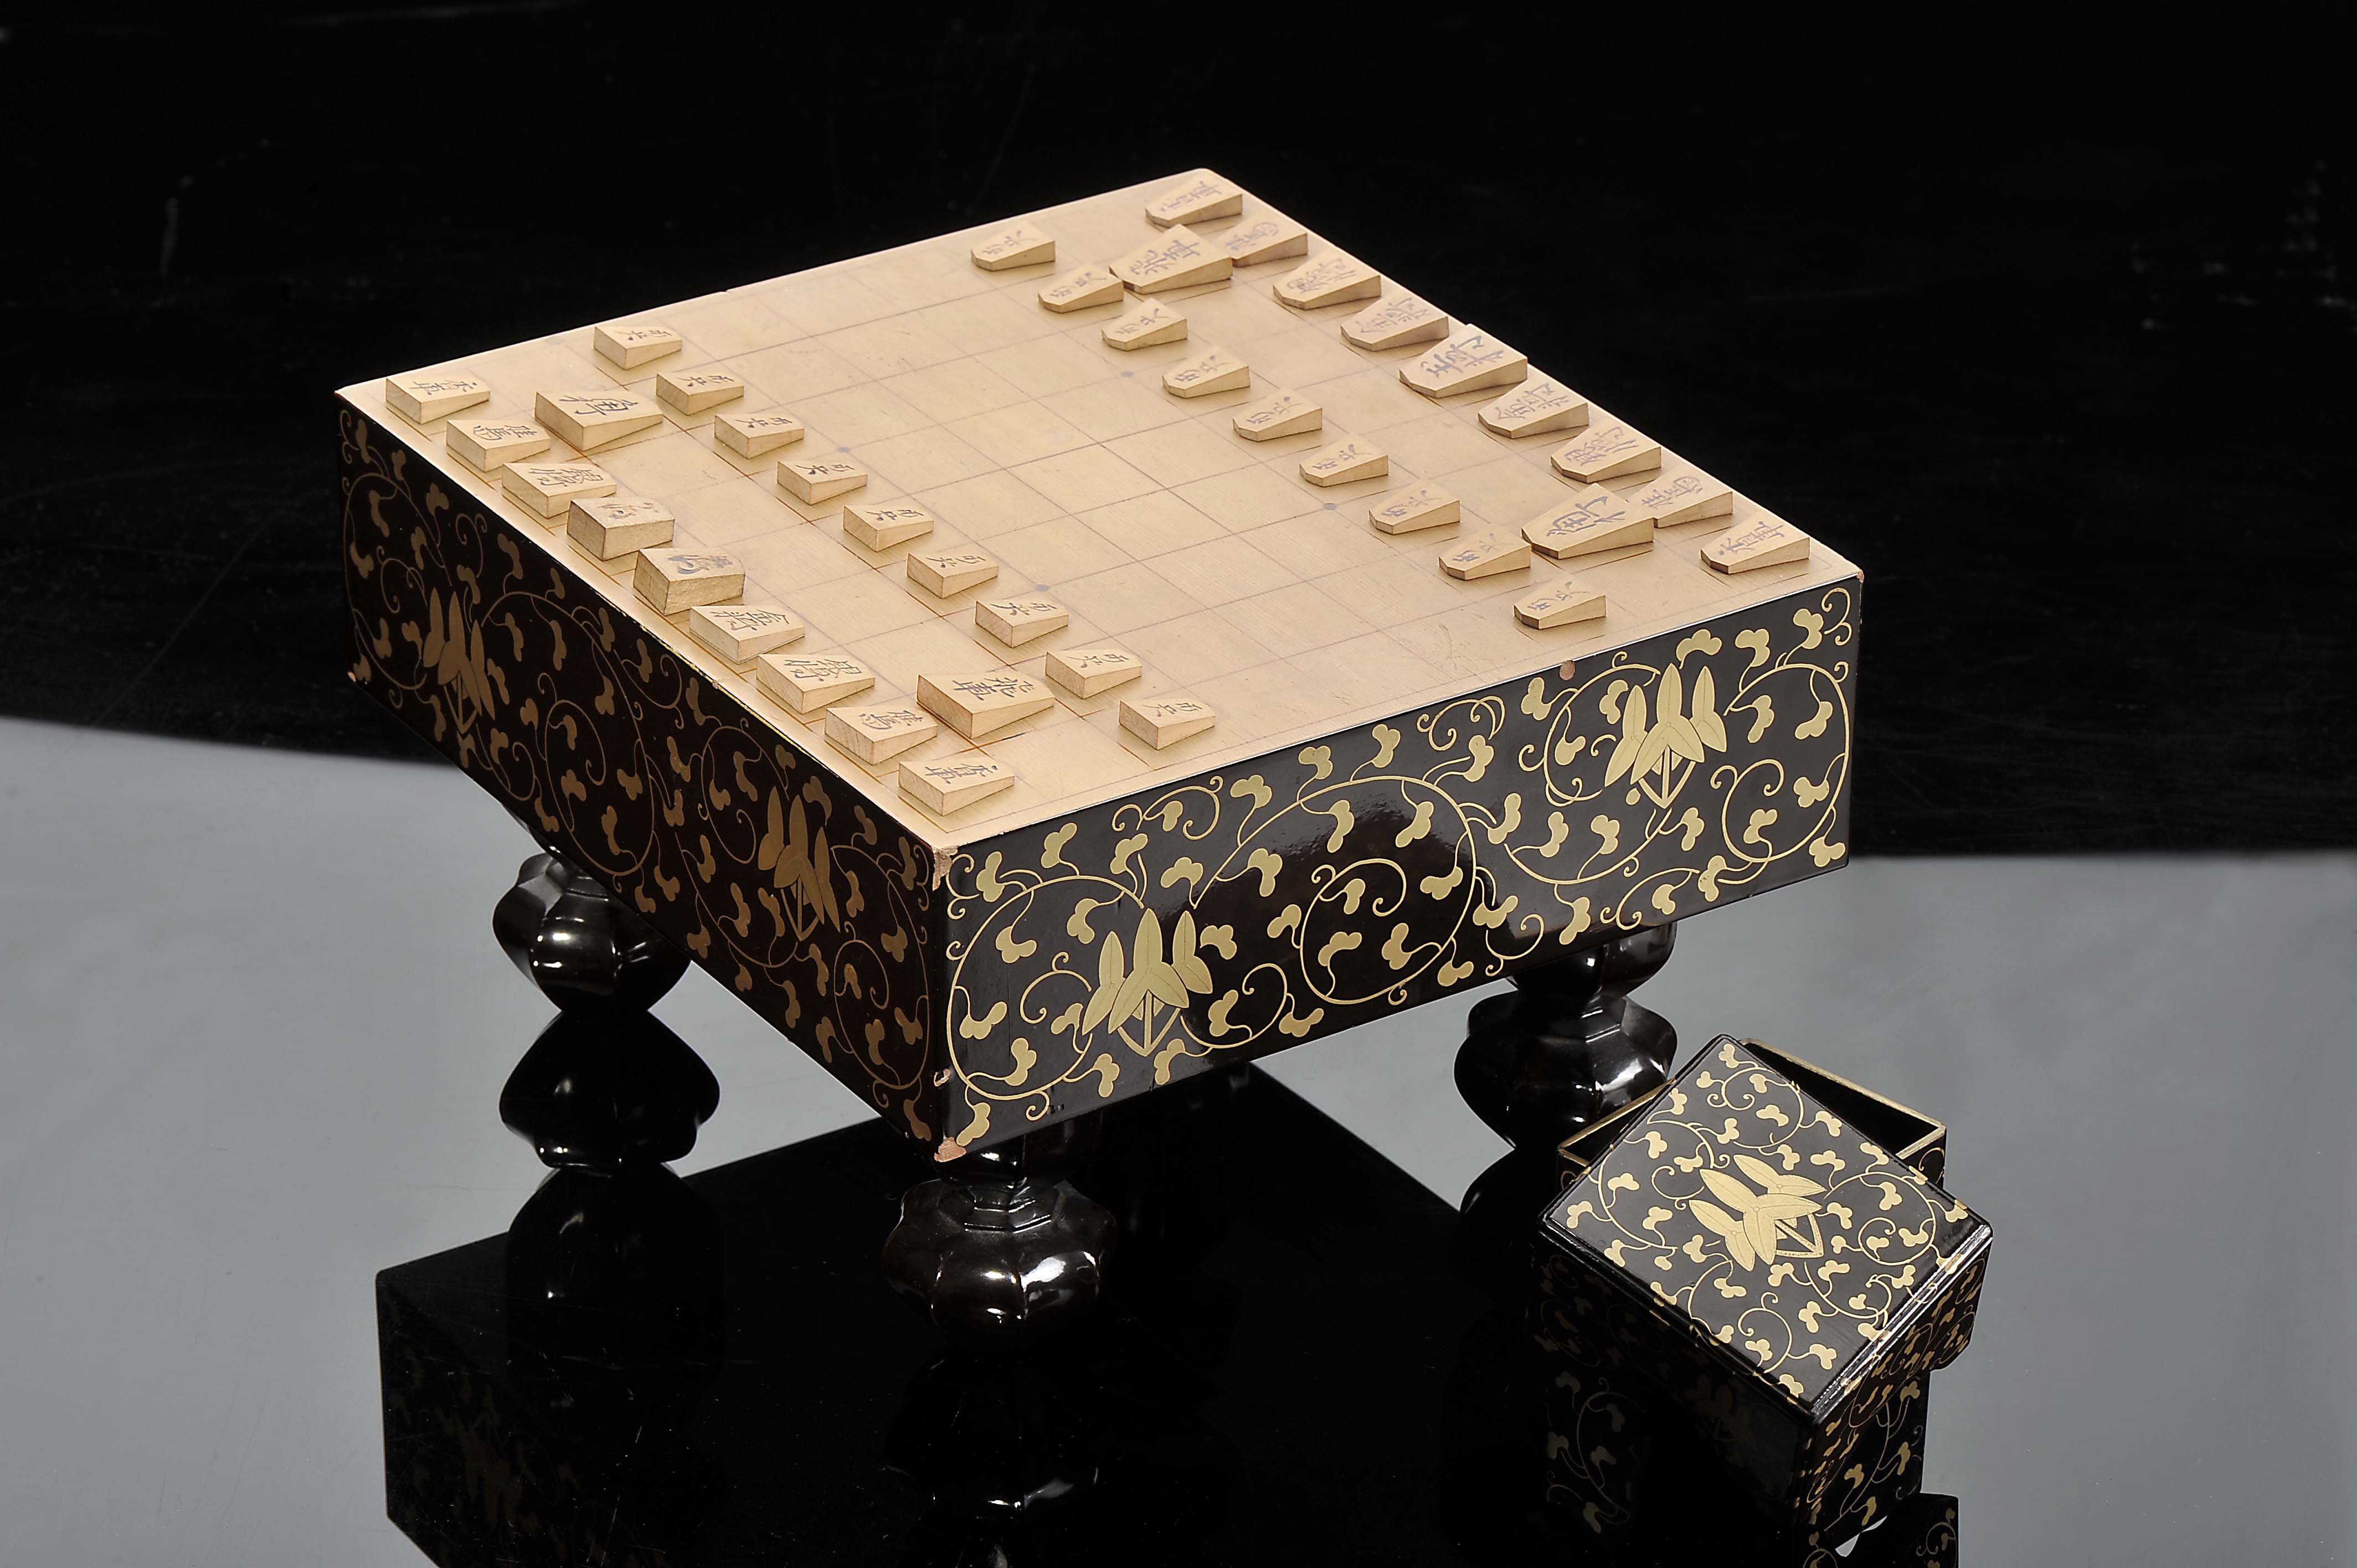 Shogi table/board with forty pieces in "Tomobako" box - Image 2 of 17